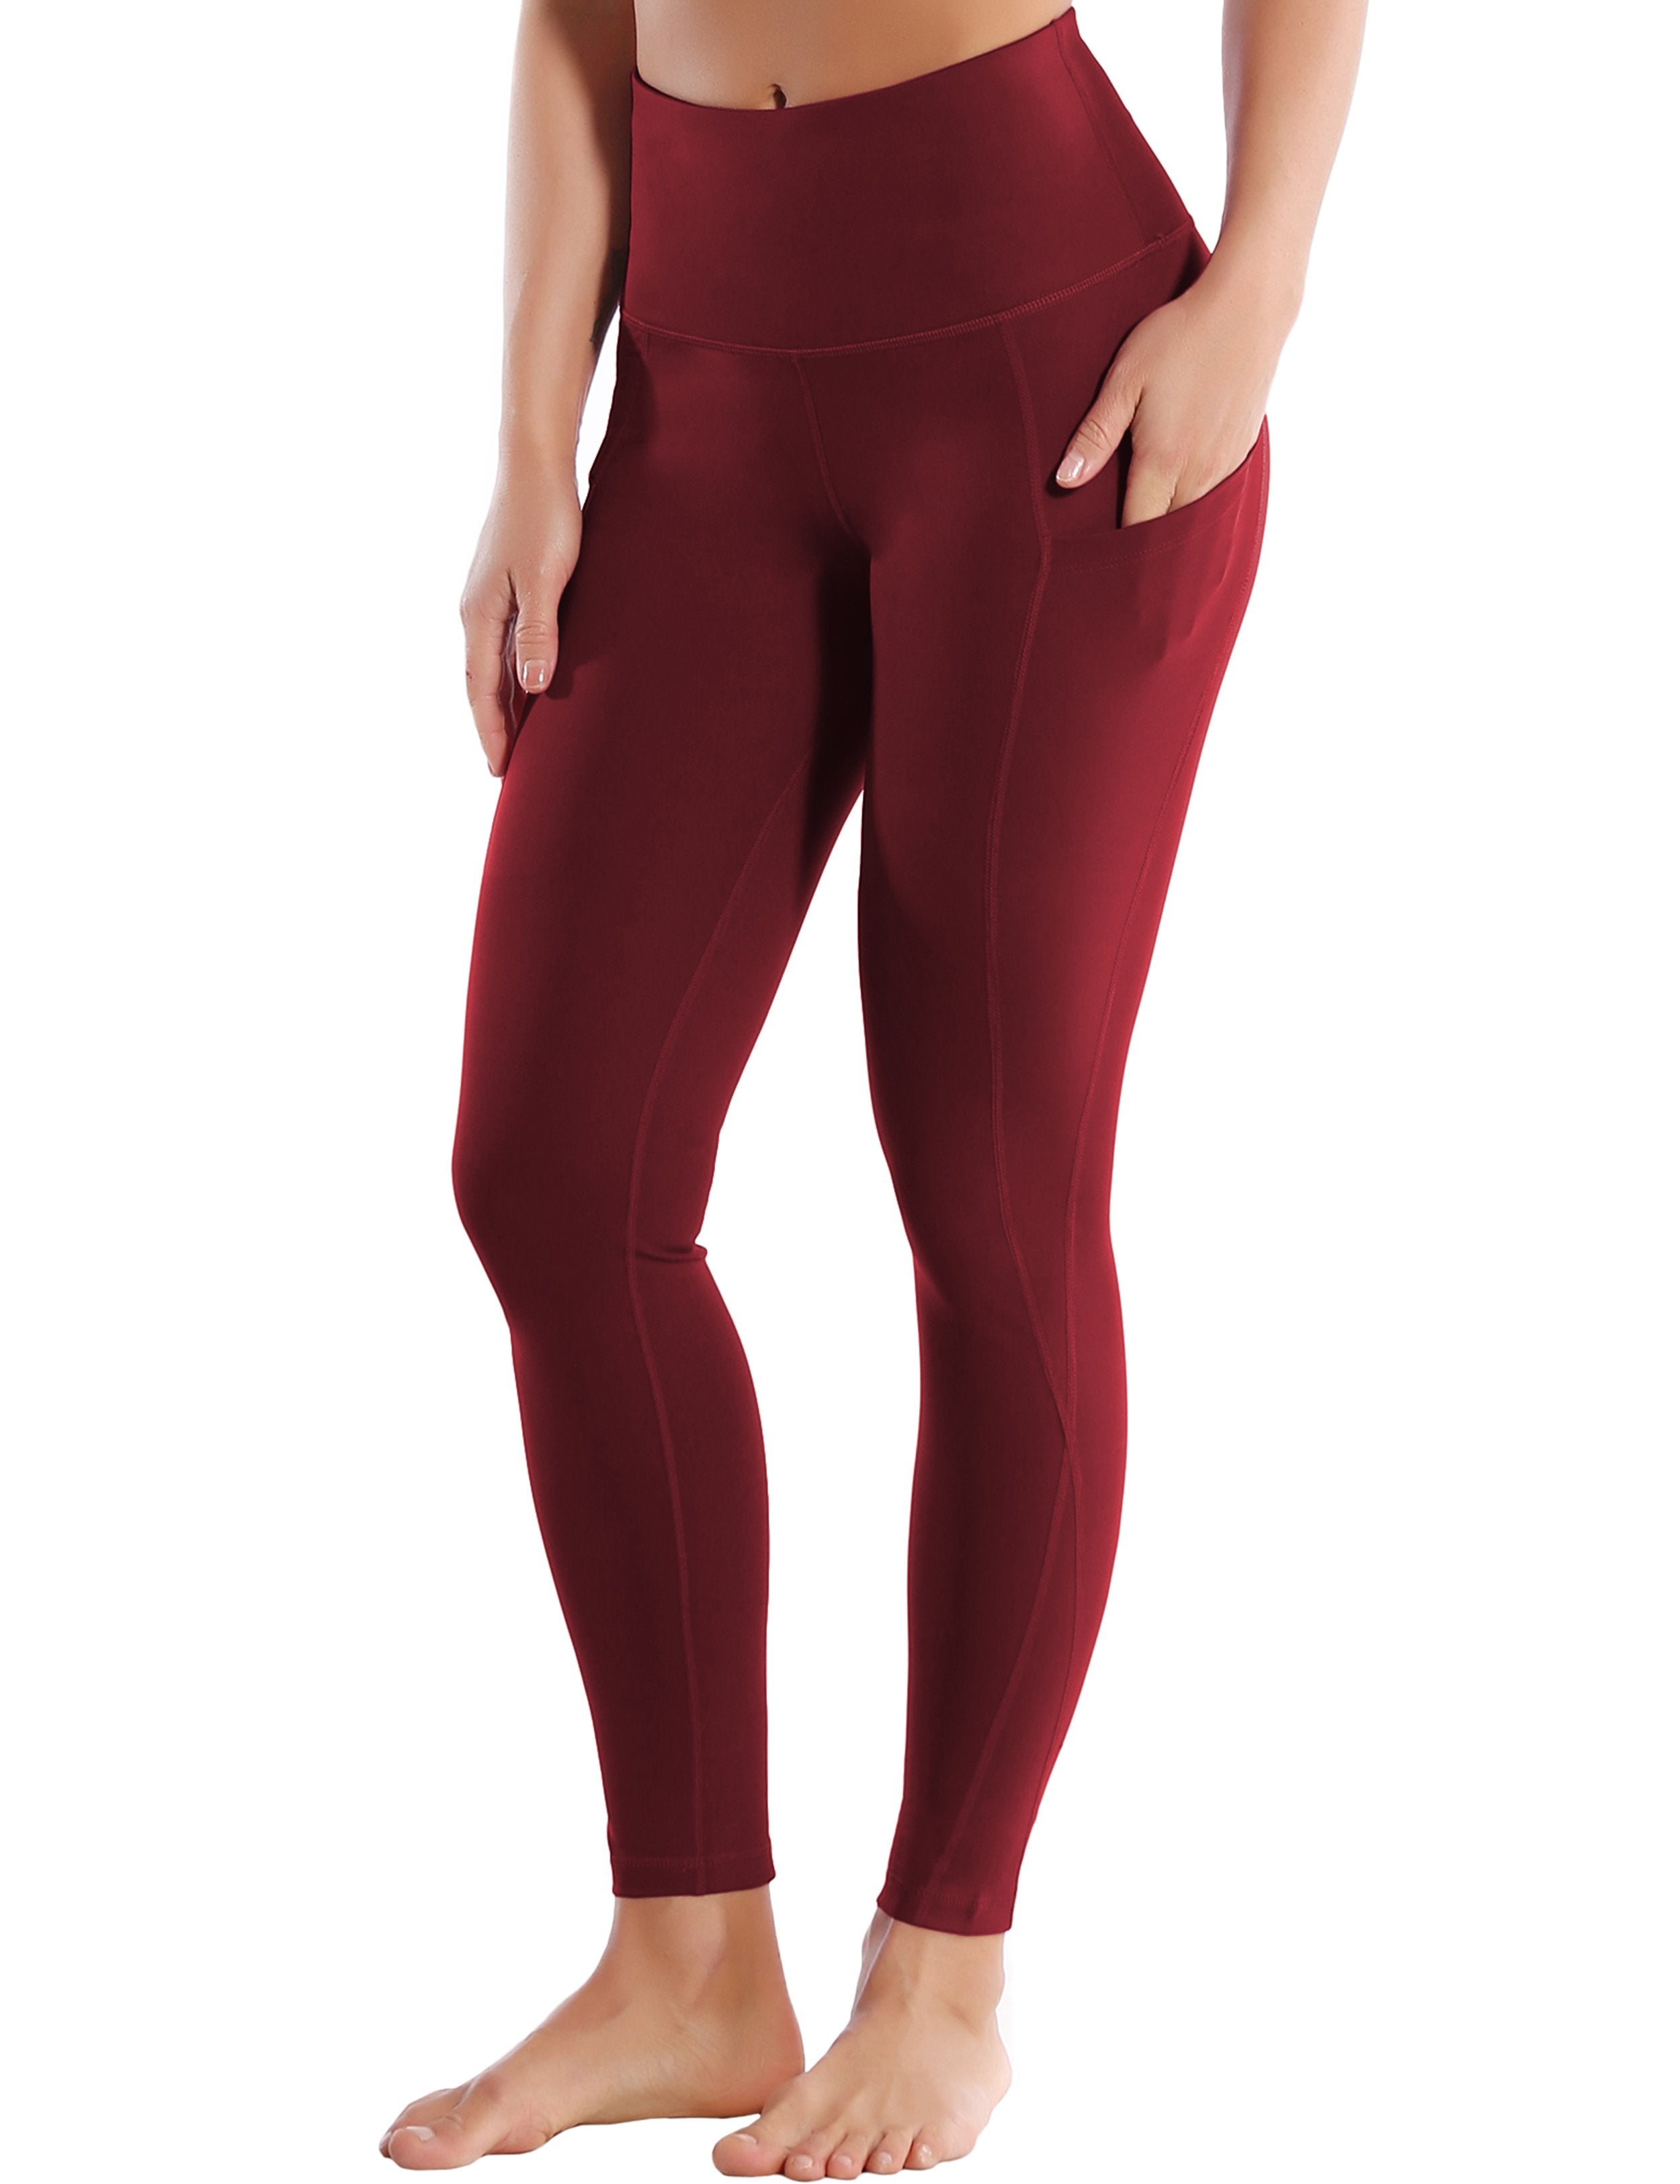 High Waist Side Pockets Golf Pants cherryred 75% Nylon, 25% Spandex Fabric doesn't attract lint easily 4-way stretch No see-through Moisture-wicking Tummy control Inner pocket